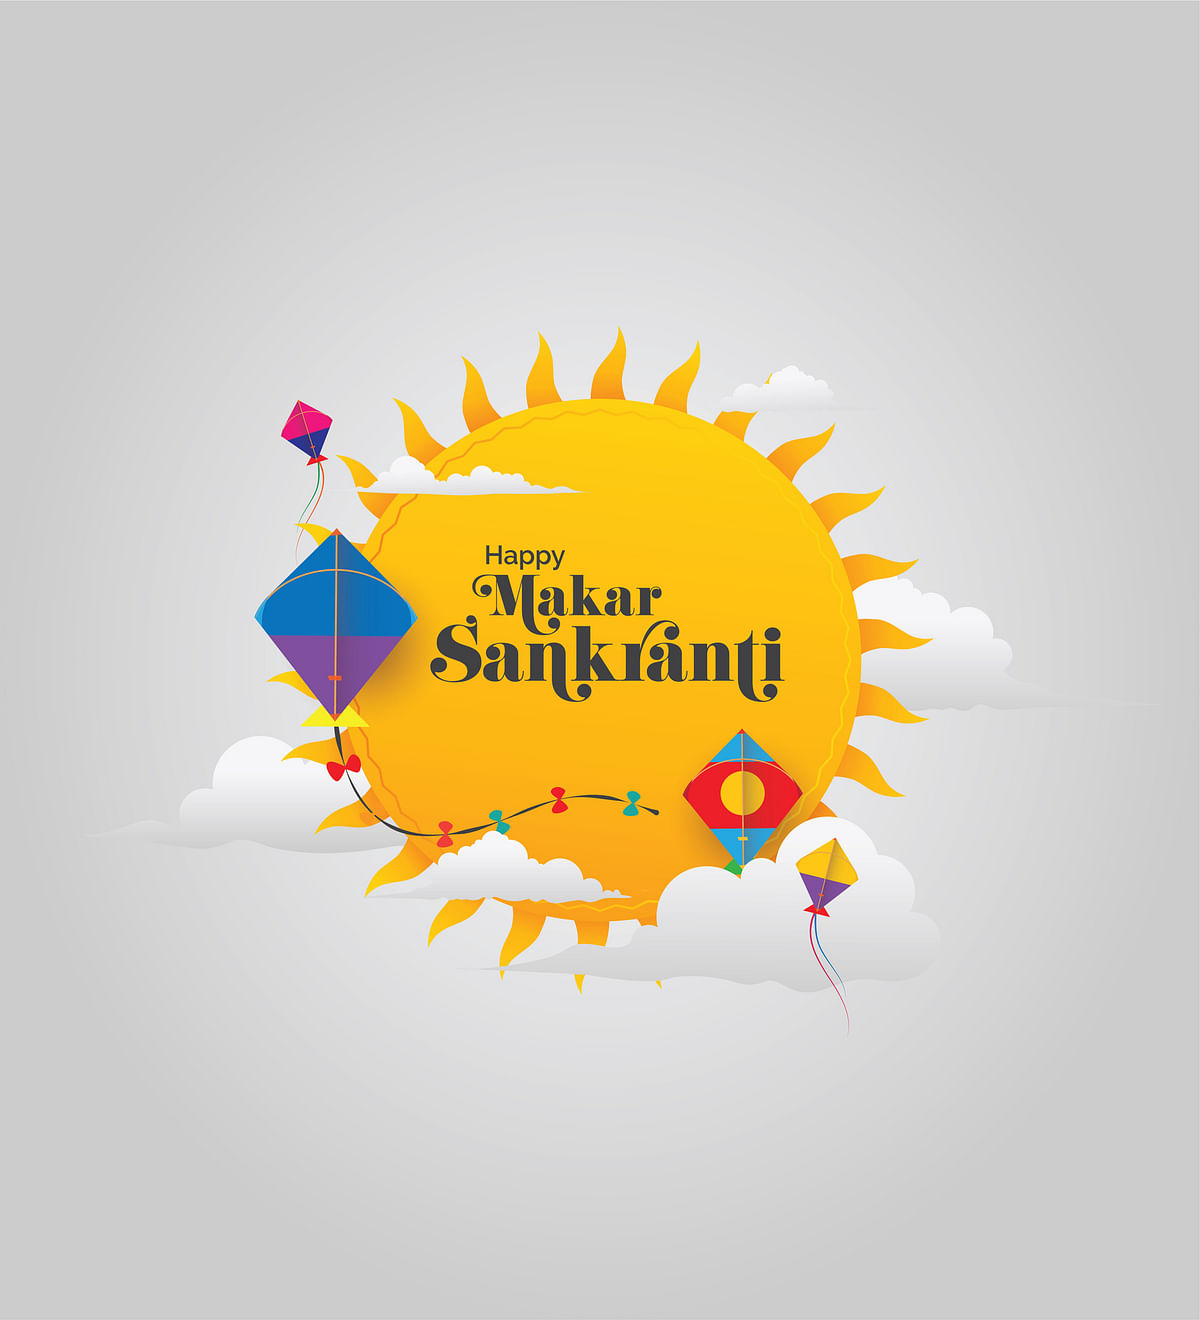 <div class="paragraphs"><p><strong>Makar Sankranti wishes and images</strong></p></div>